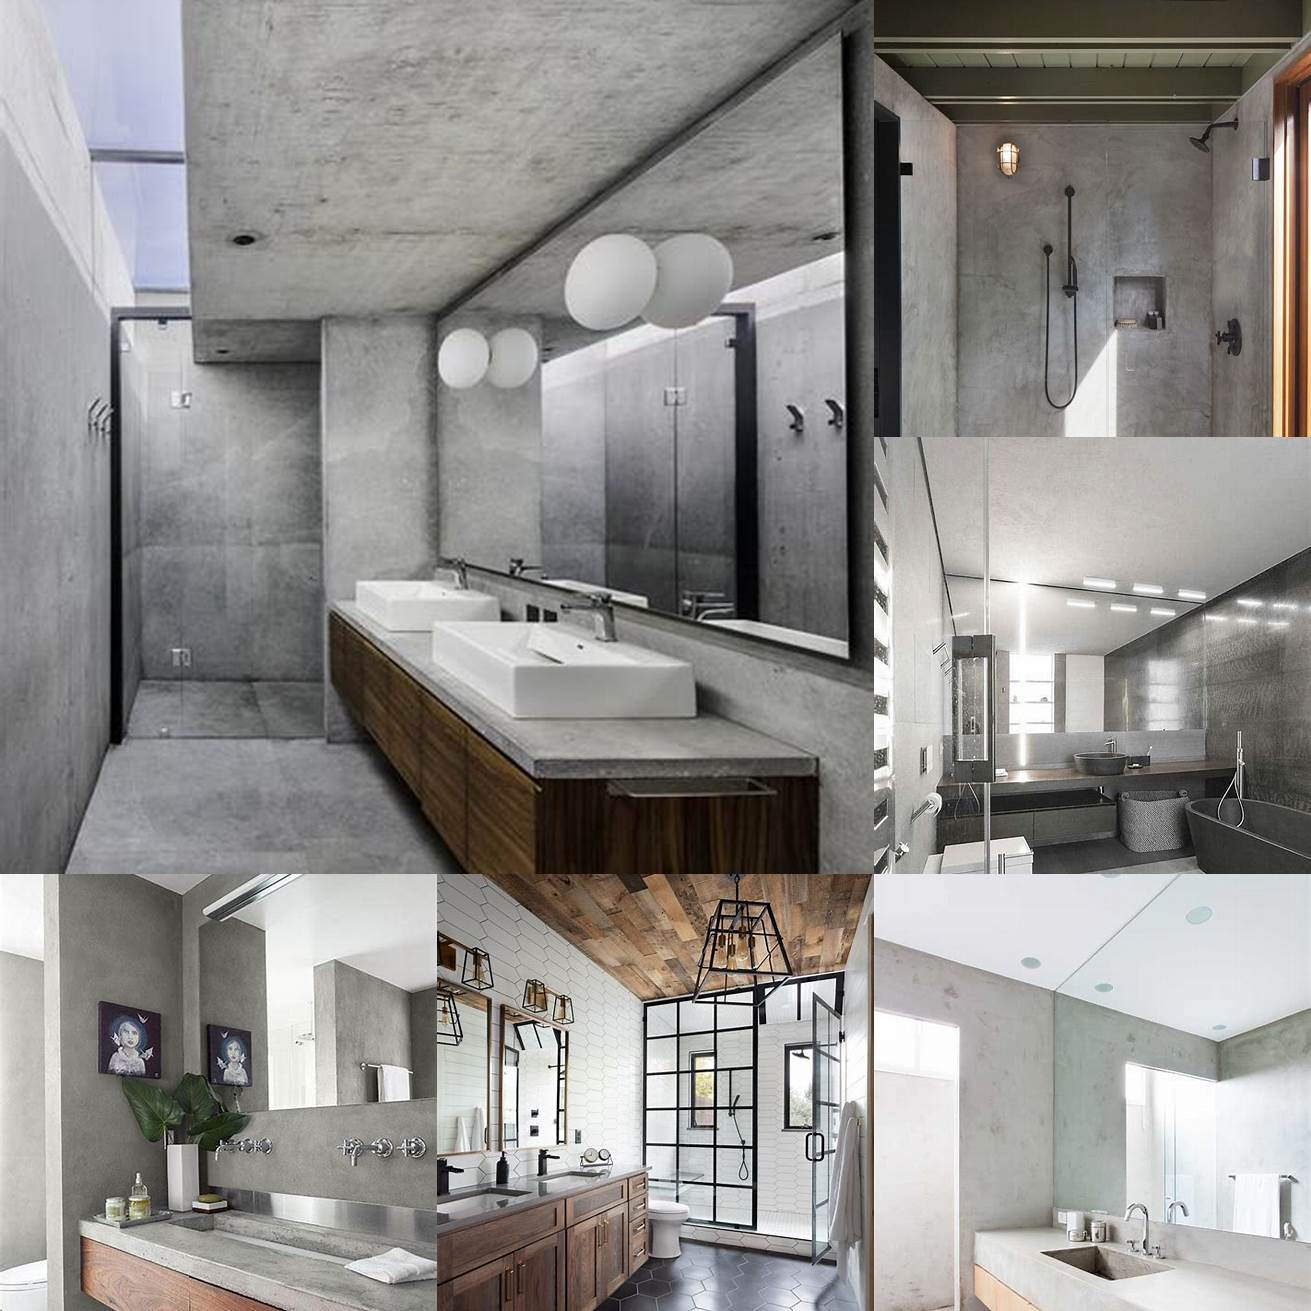 Concrete A modern and industrial material concrete adds a unique look to your bathroom design It is durable and easy to clean However it can be expensive and heavy